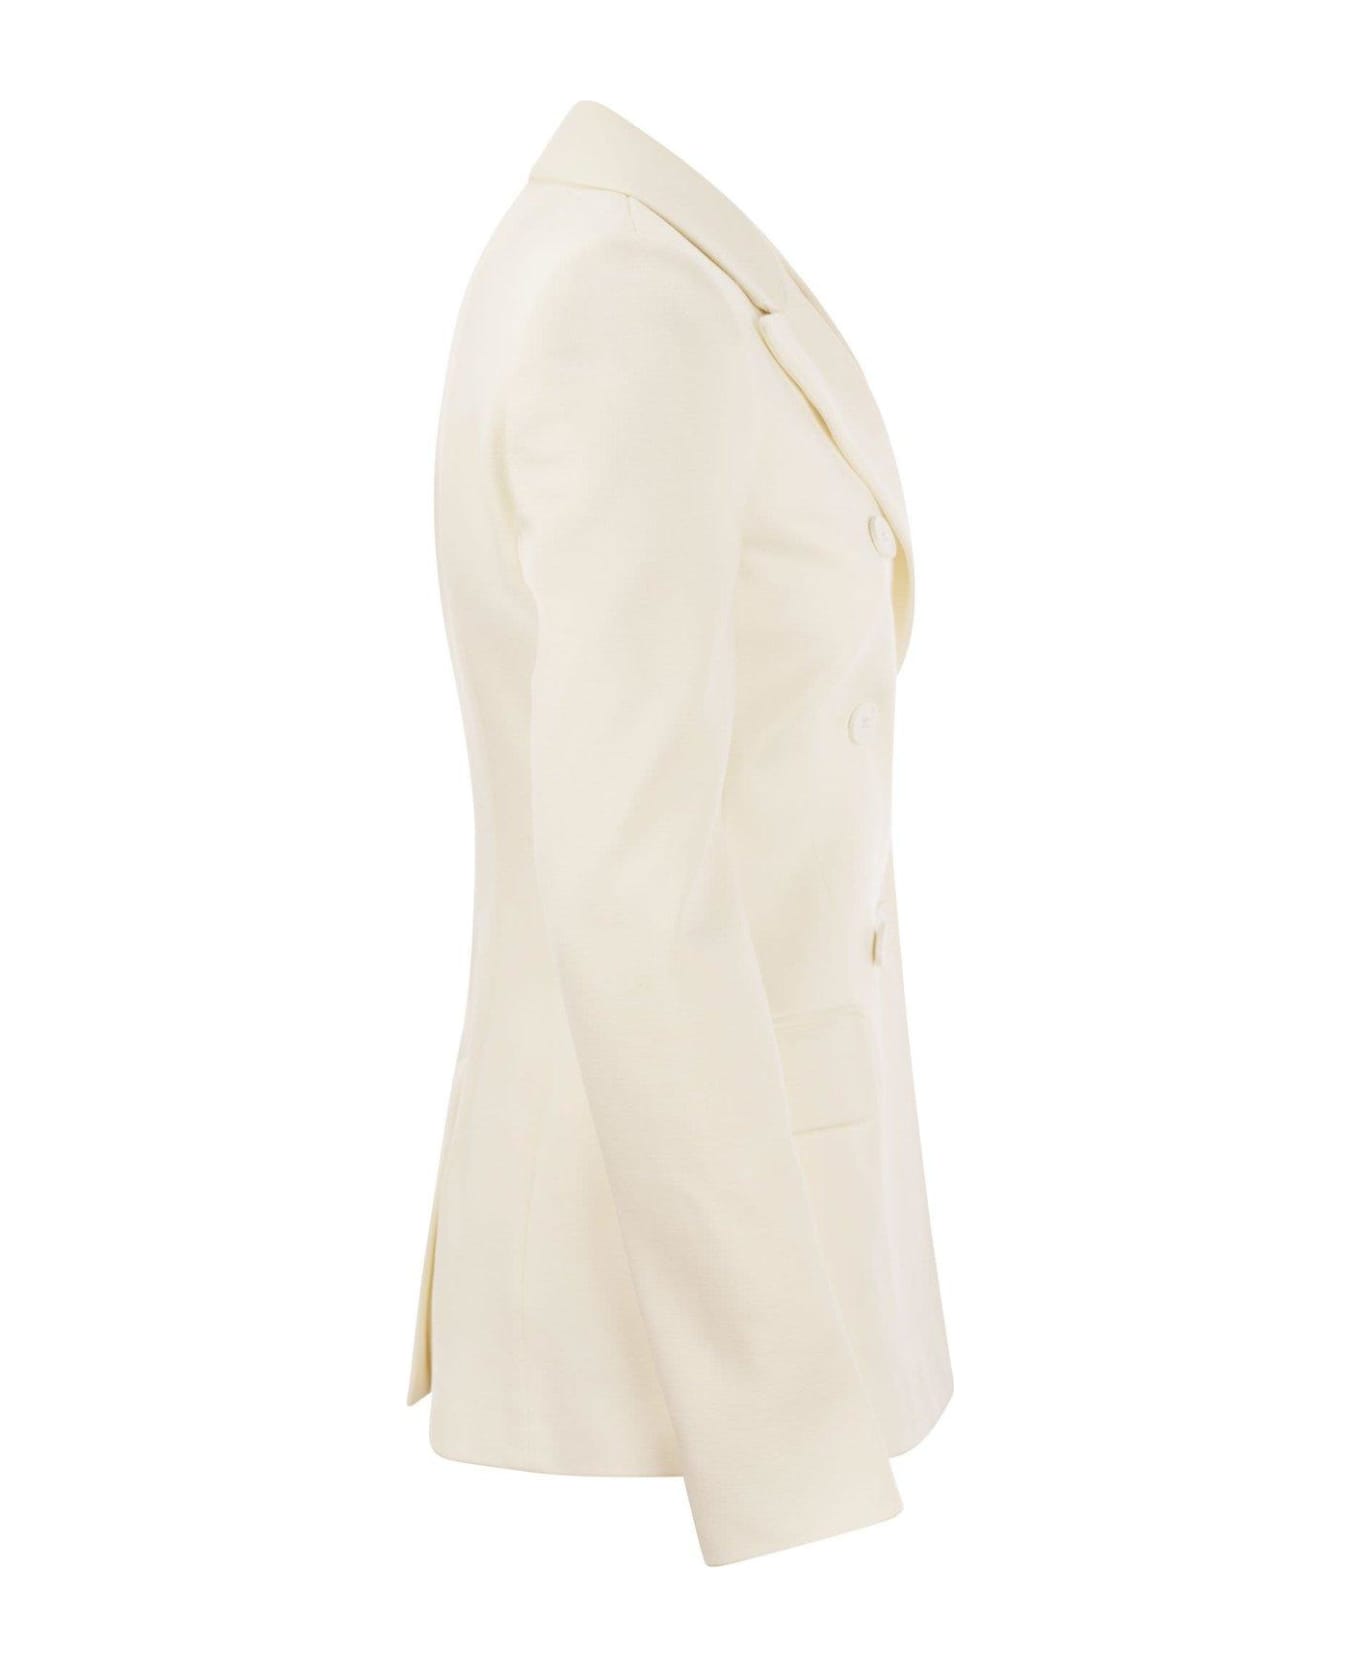 SportMax Double-breasted Long-sleeved Jacket - Gesso